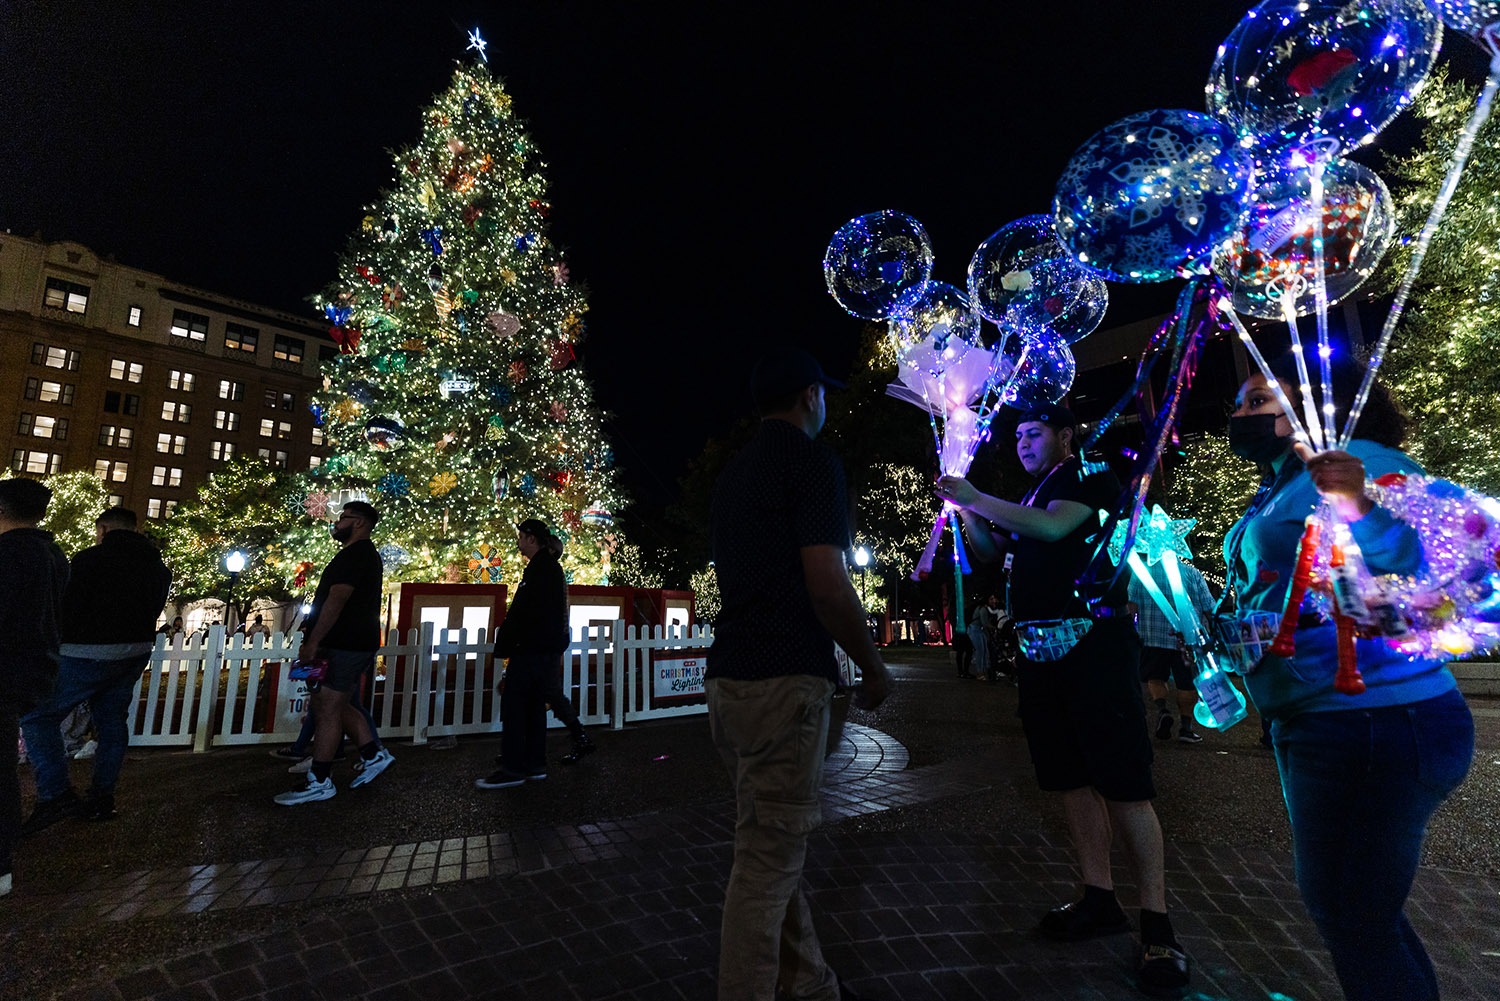 Thousands of people have gathered at Travis Park since the start of the holiday season in San Antonio to take photos in front of the H-E-B Christmas tree, and skate at the Rotary Ice Rink. Dec. 5, 2021. Photo by Chris Stokes | Heron contributor